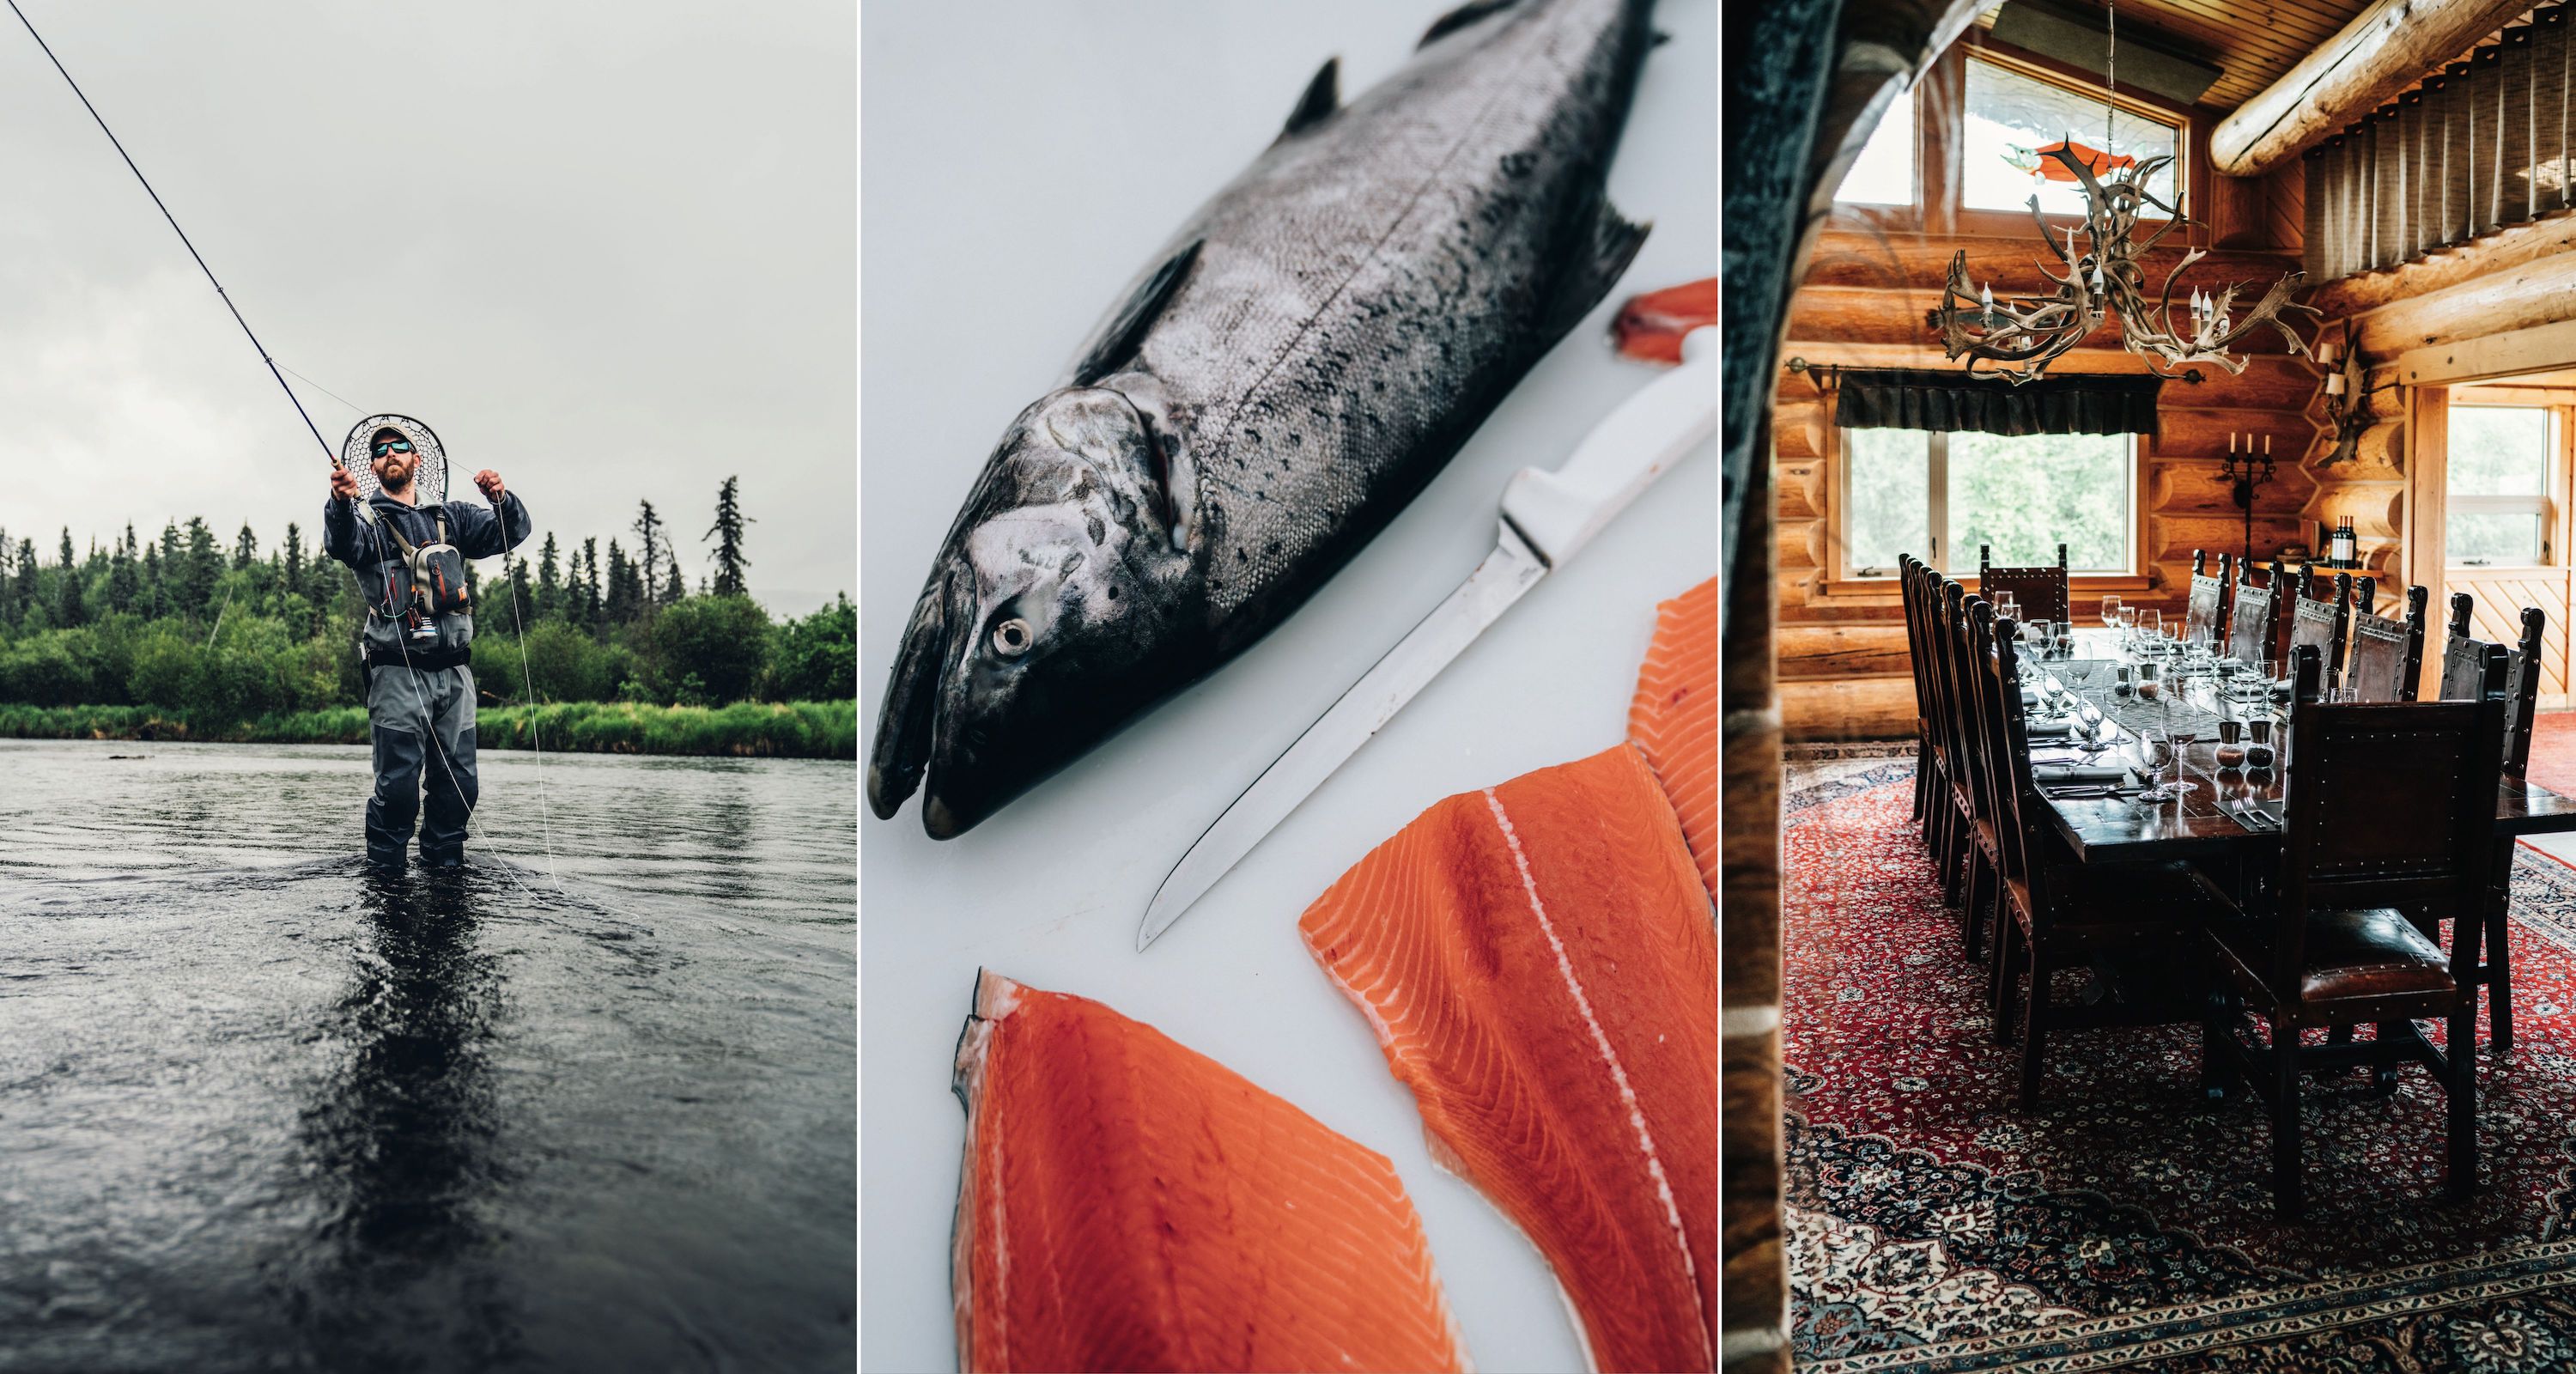 Outdoors, Camping & Travel :: All Outdoors Books :: Fishing :: Here's How  To: Steelhead & Salmon Drift Fishing - Paradise Cay - Wholesale Books,  Gifts, Navigational Charts, On Demand Publishing